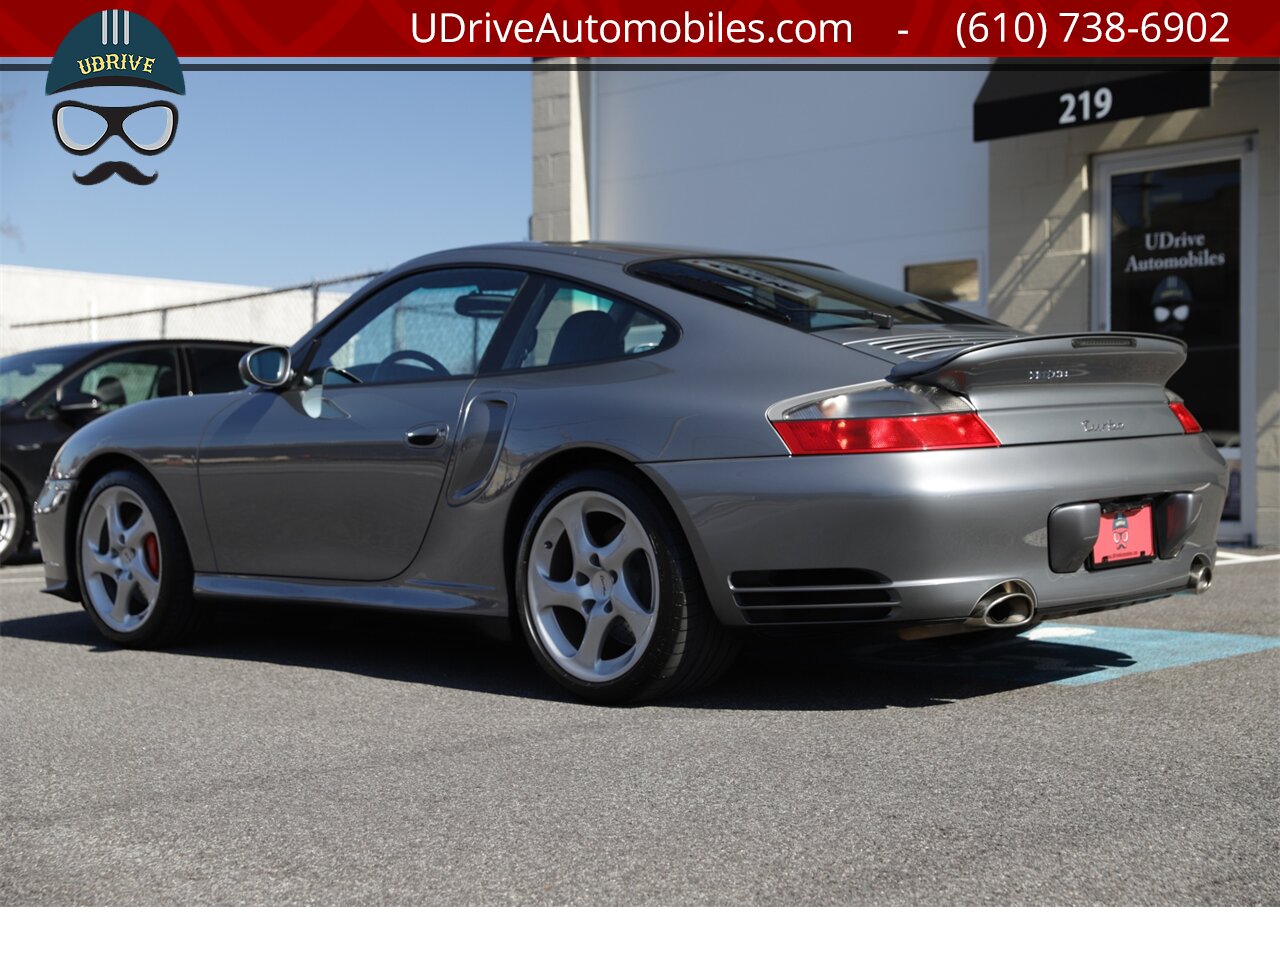 2003 Porsche 911 996 Turbo X50 Power Kit 6 Speed Seal Grey  over Black Leather - Photo 23 - West Chester, PA 19382